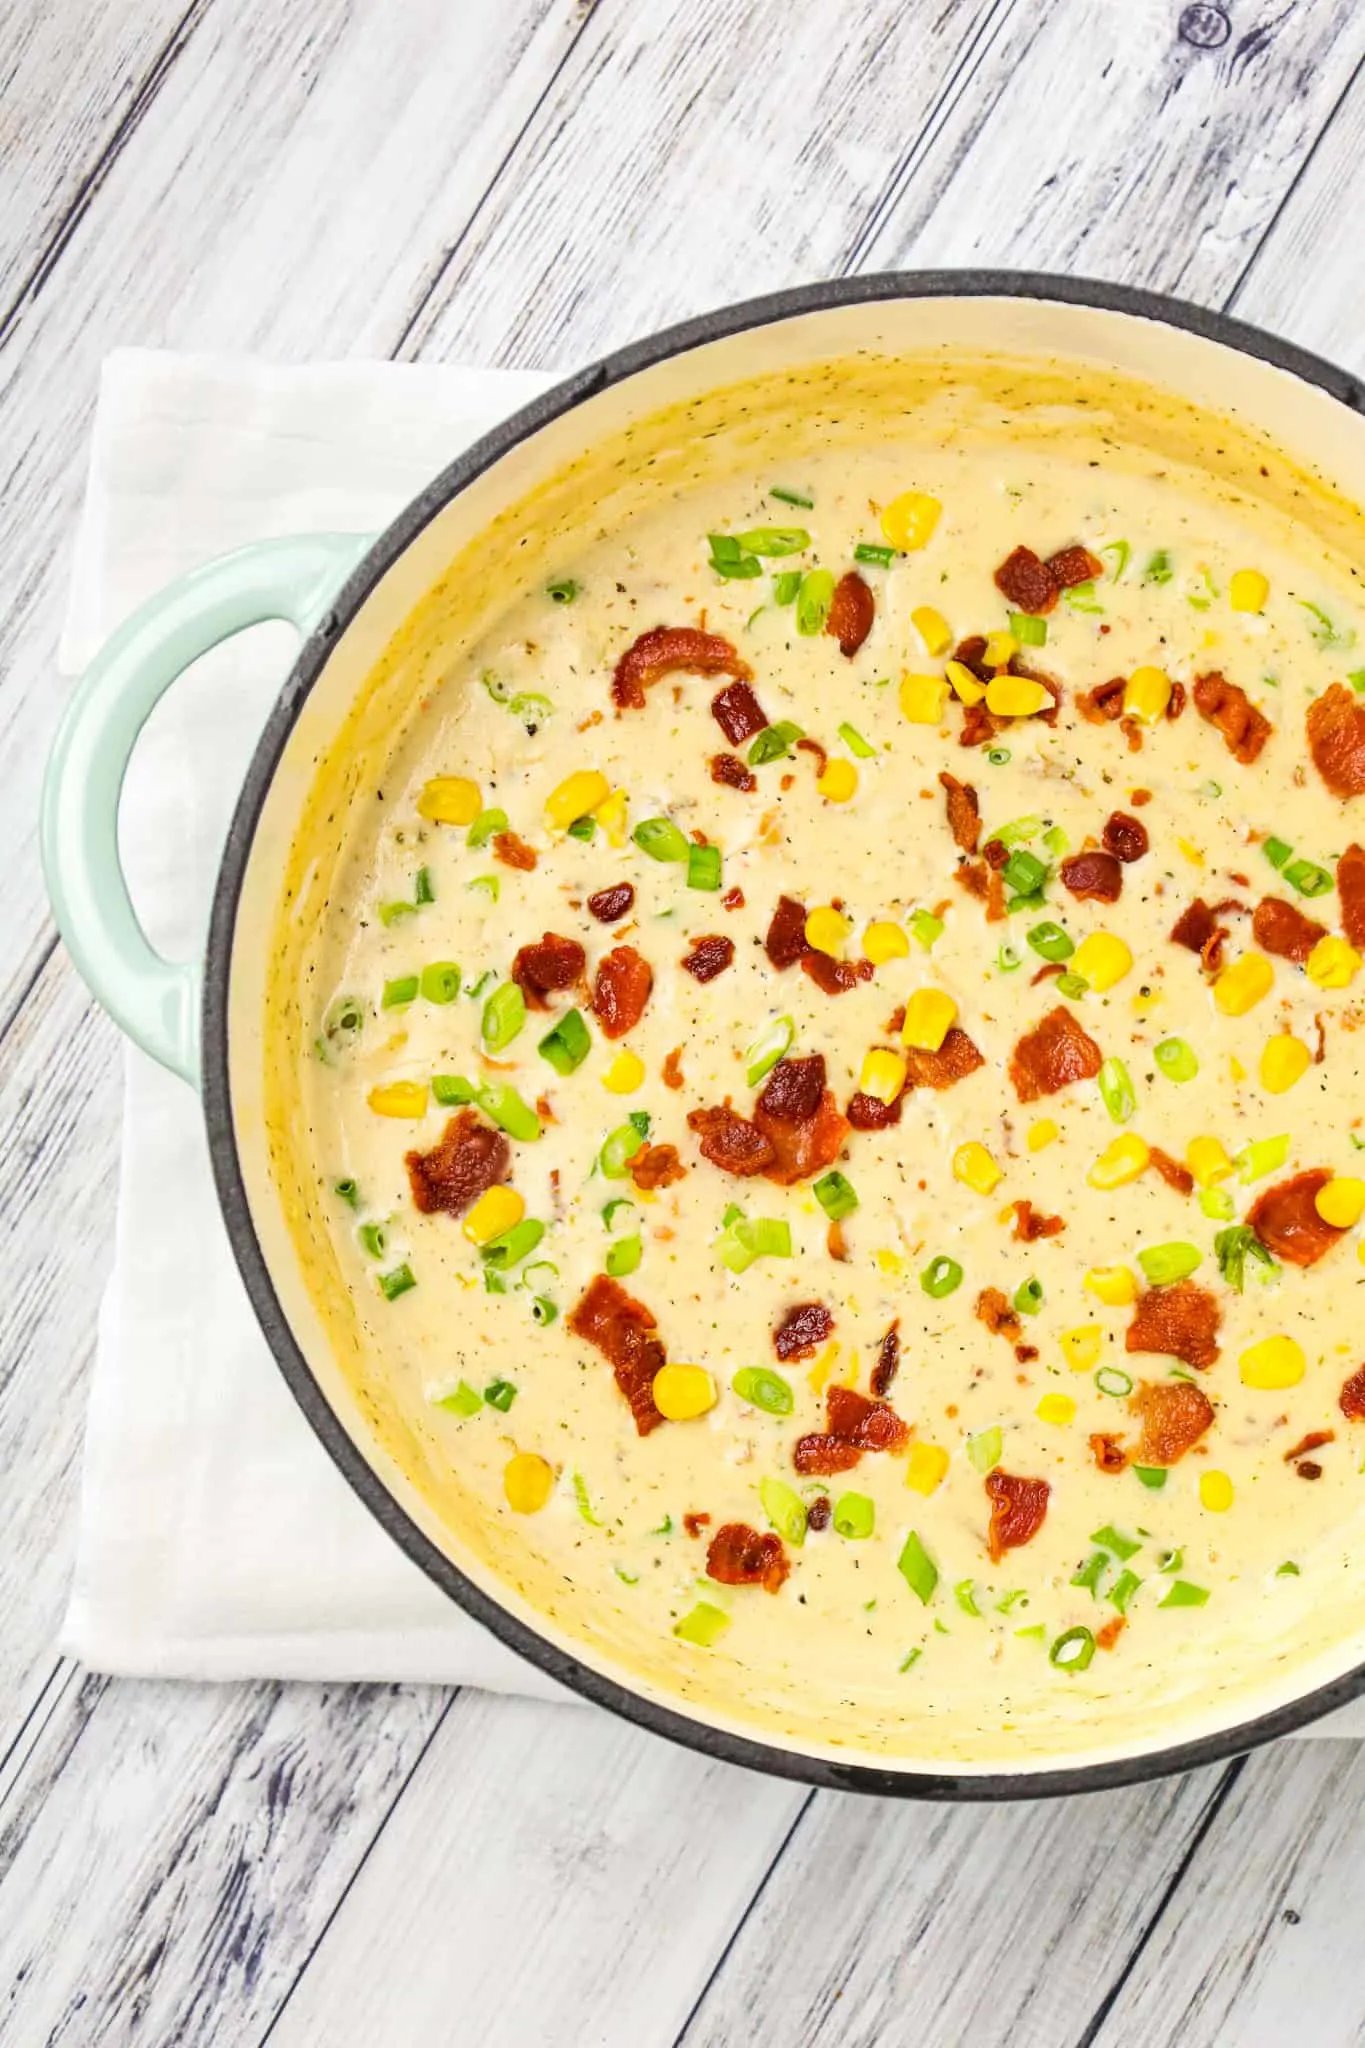 Turkey Corn Chowder with Bacon is a creamy soup recipe loaded with shredded turkey, corn, bacon and chopped green onions.